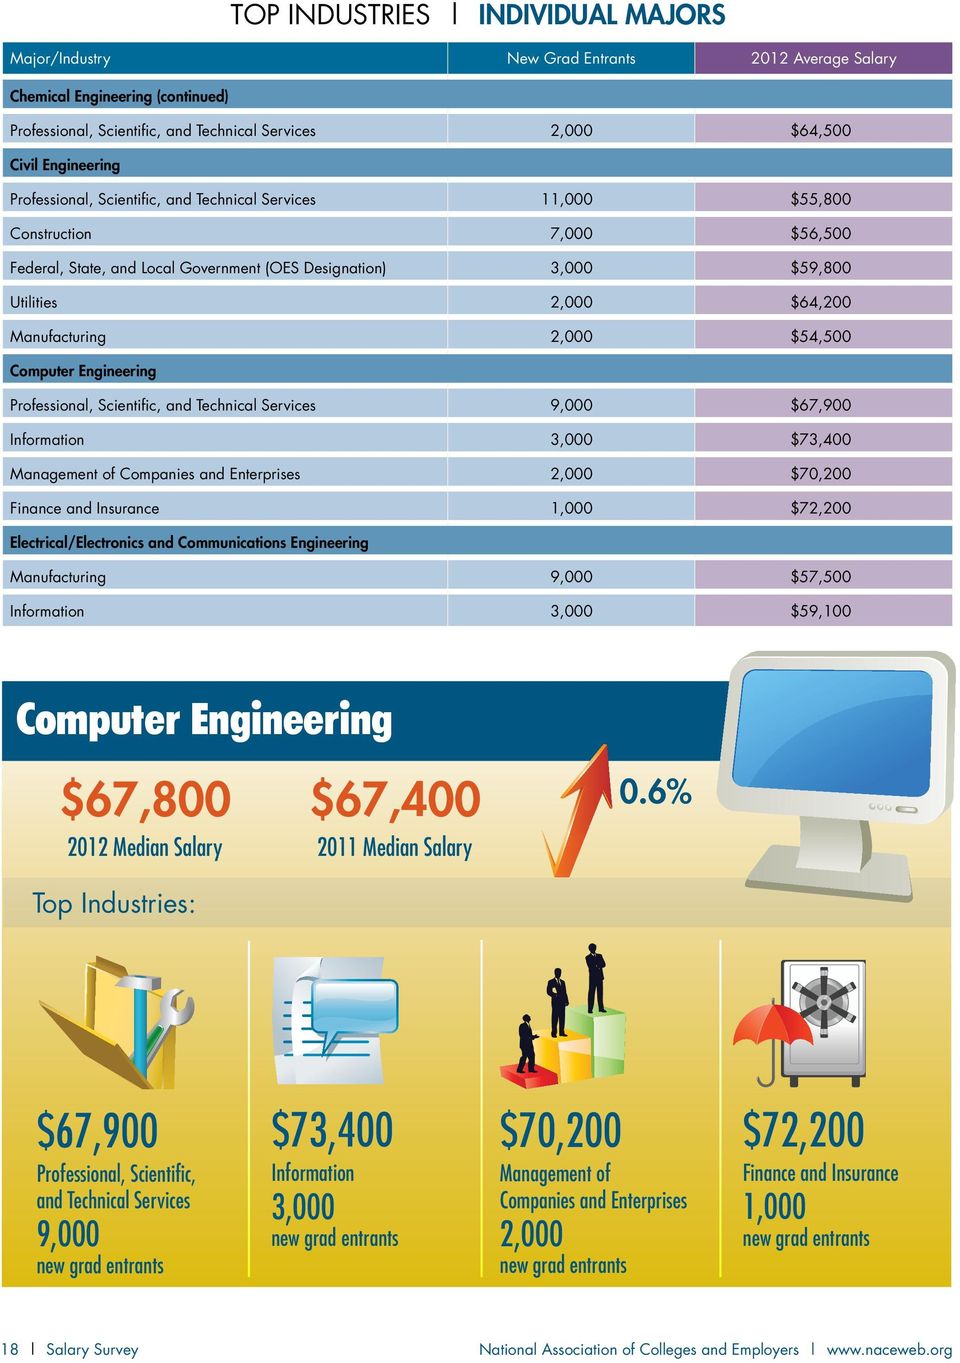 2,000 $54,500 Computer Engineering Professional, Scientific, and Technical Services 9,000 $67,900 Information 3,000 $73,400 Management of Companies and Enterprises 2,000 $70,200 Finance and Insurance